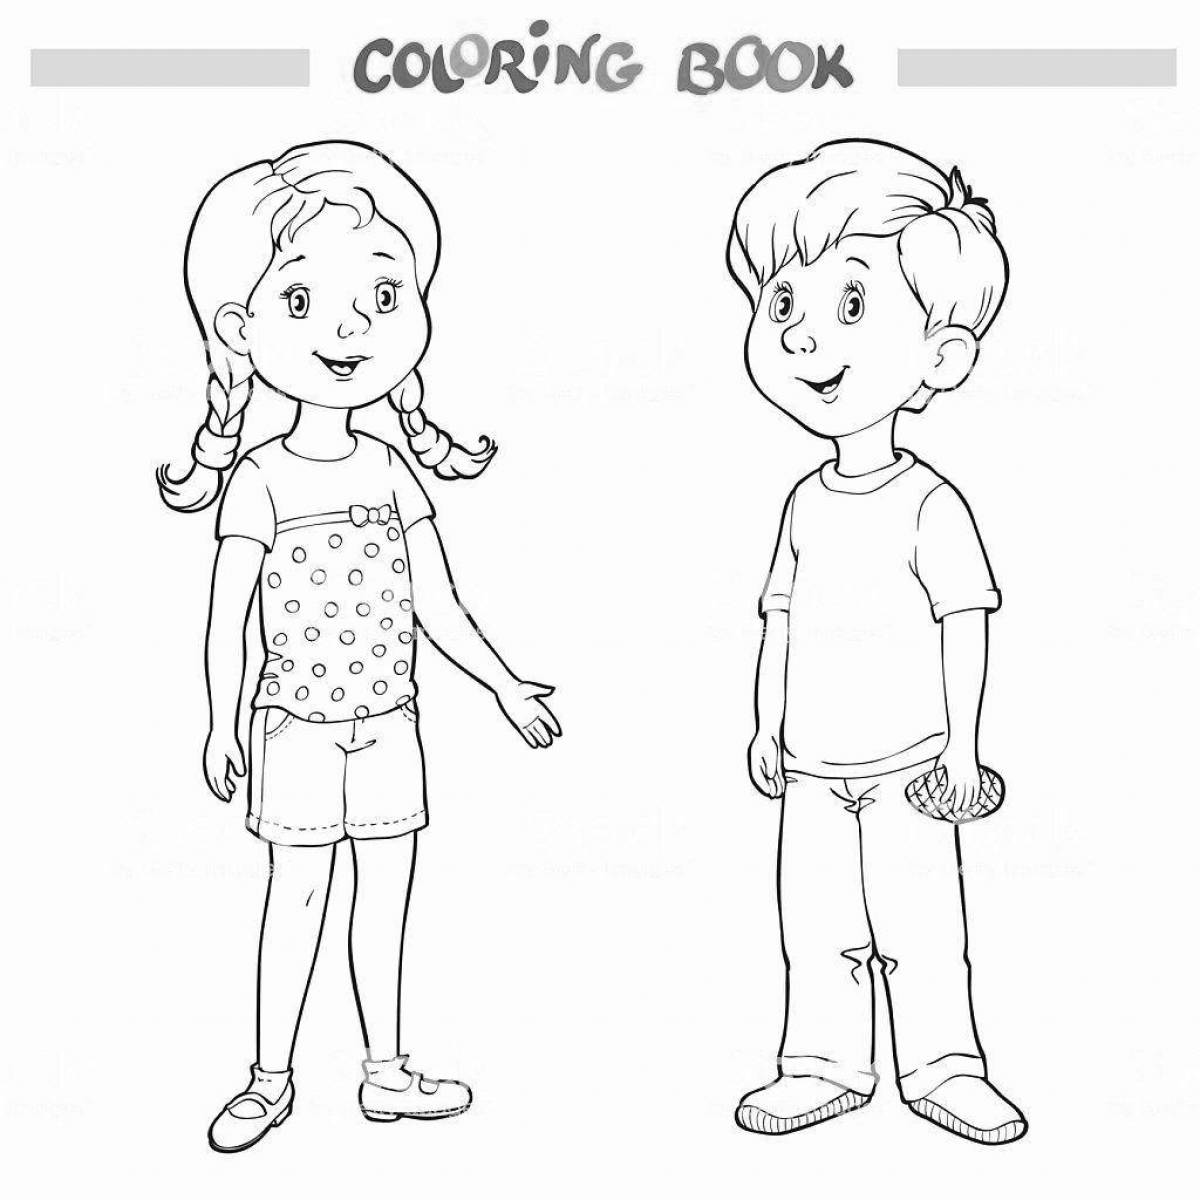 Creative how to draw a person coloring book